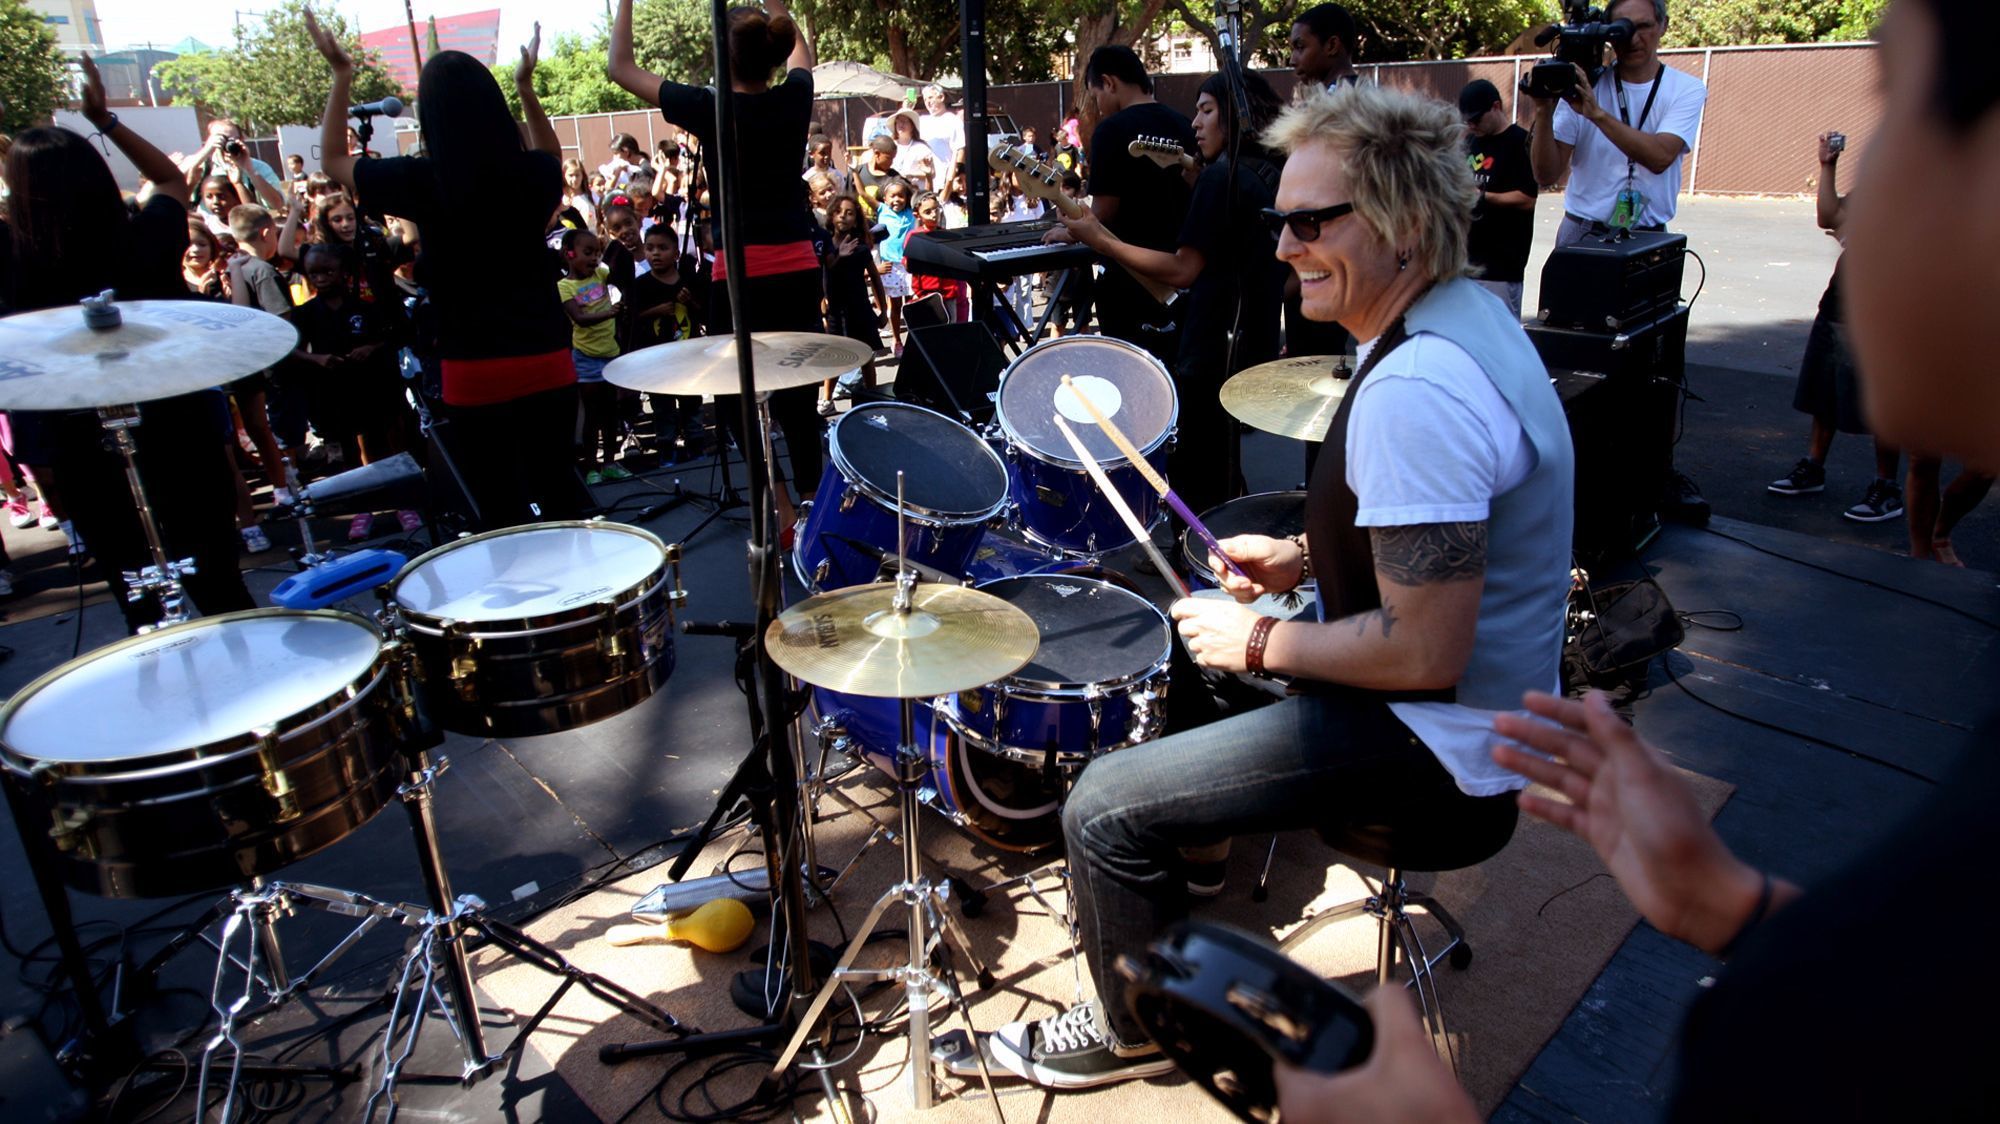 The ranch was originally owned by drummer Matt Sorum, formerly of Guns N' Roses.